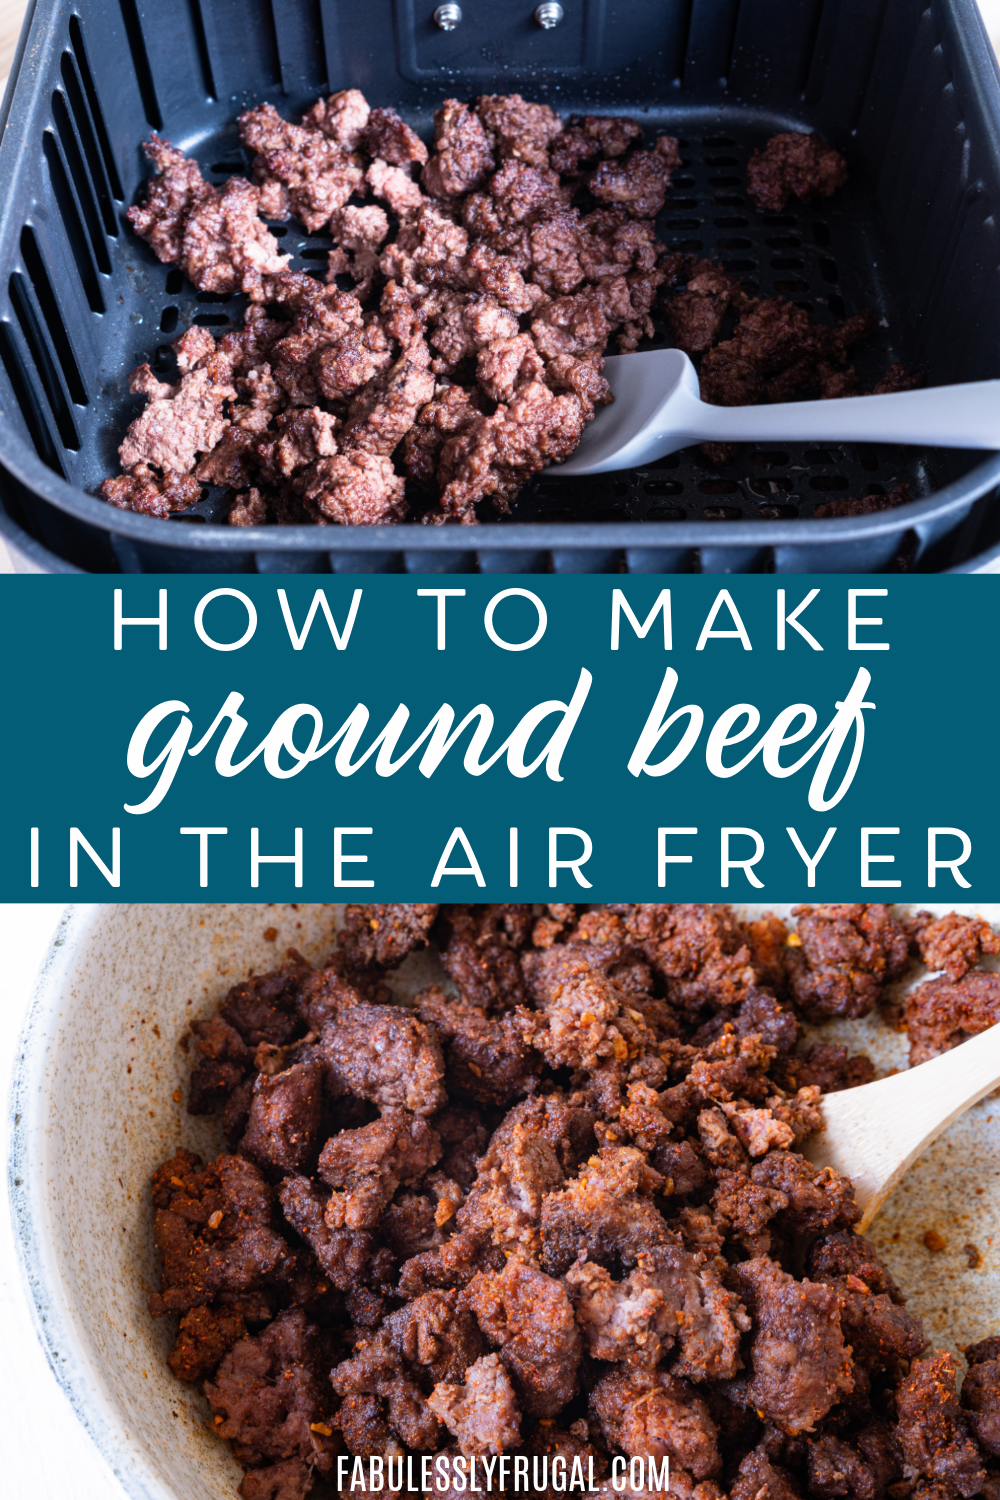 Ground beef in the air fryer is easy and takes two times quicker than cooking on your stovetop! I promise this will be one of your new go-to ways to cook your ground beef.